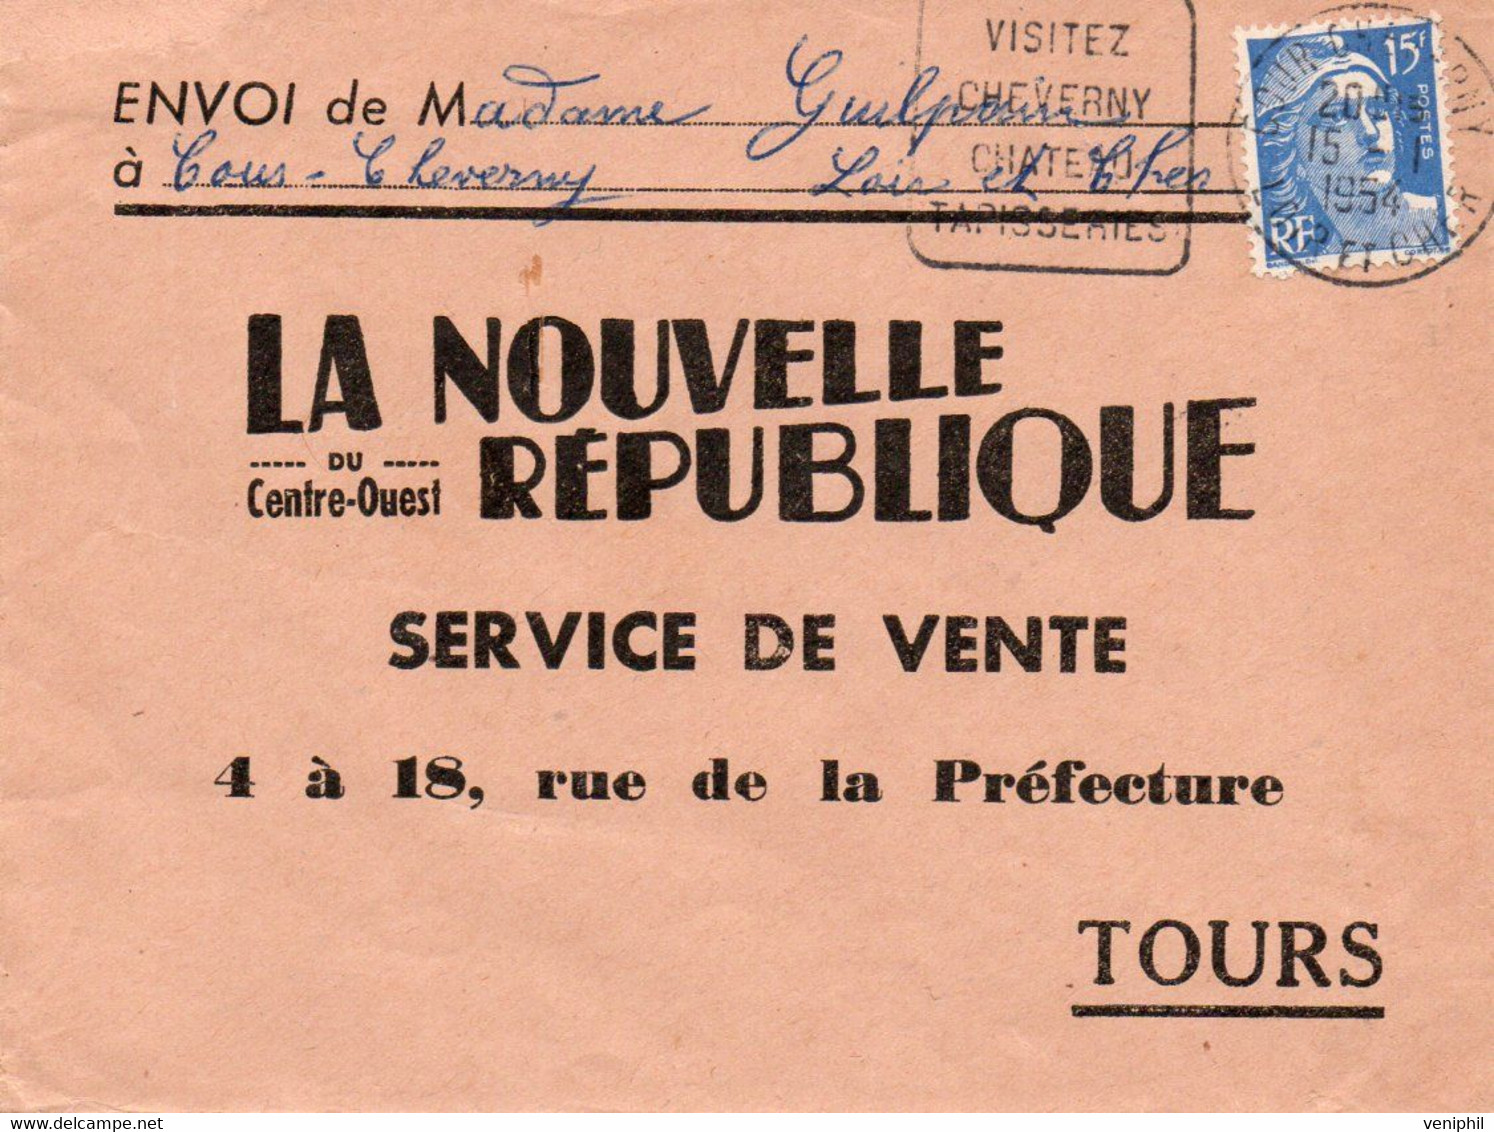 LETTRE AFFRANCHIE N° 886 -OBLITERATION DAGUIN -  VISITEZ CHEVERNY CHATEAU TAPISSERIES -CAD COUR-CHEVERNY -1954 - Mechanical Postmarks (Other)